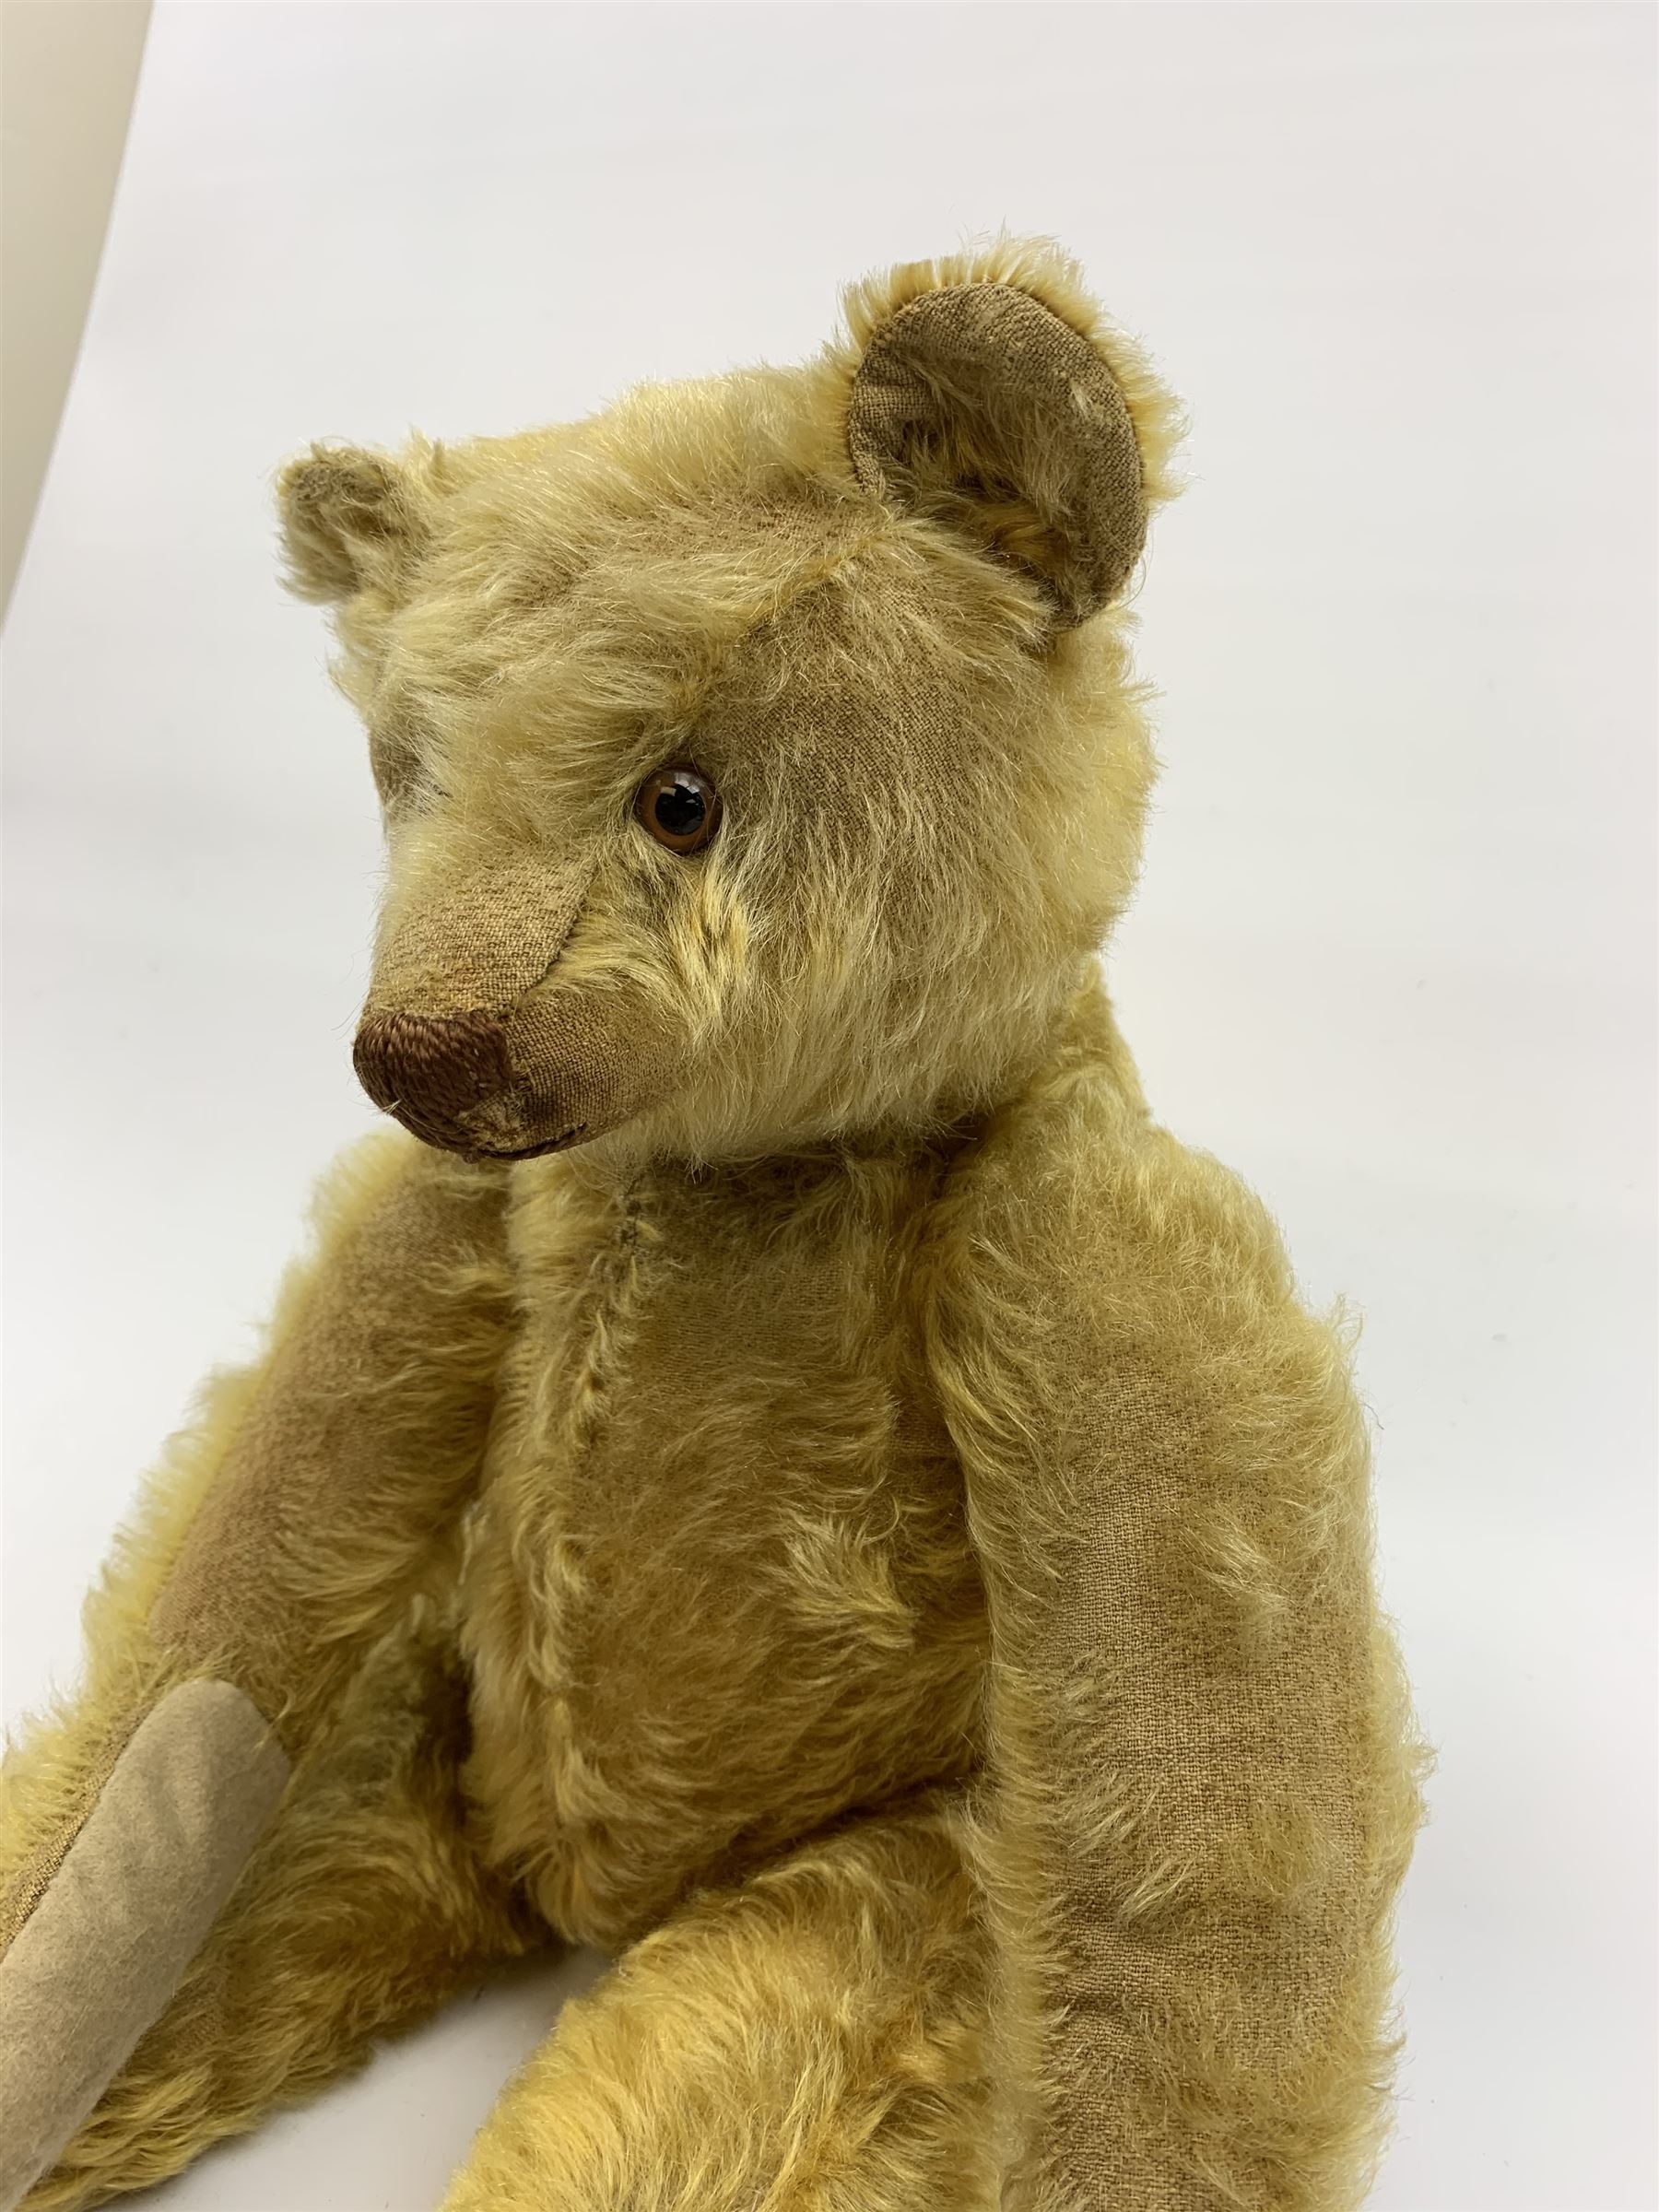 Lot - 16 STEIFF U.S.A. EXCLUSIVE LOUIS TEDDY BEAR. DARK BROWN MOHAIR,  GLASS EYES, FULLY JOINTED WITH GROWLER, LIMITED EDITION #1329/3